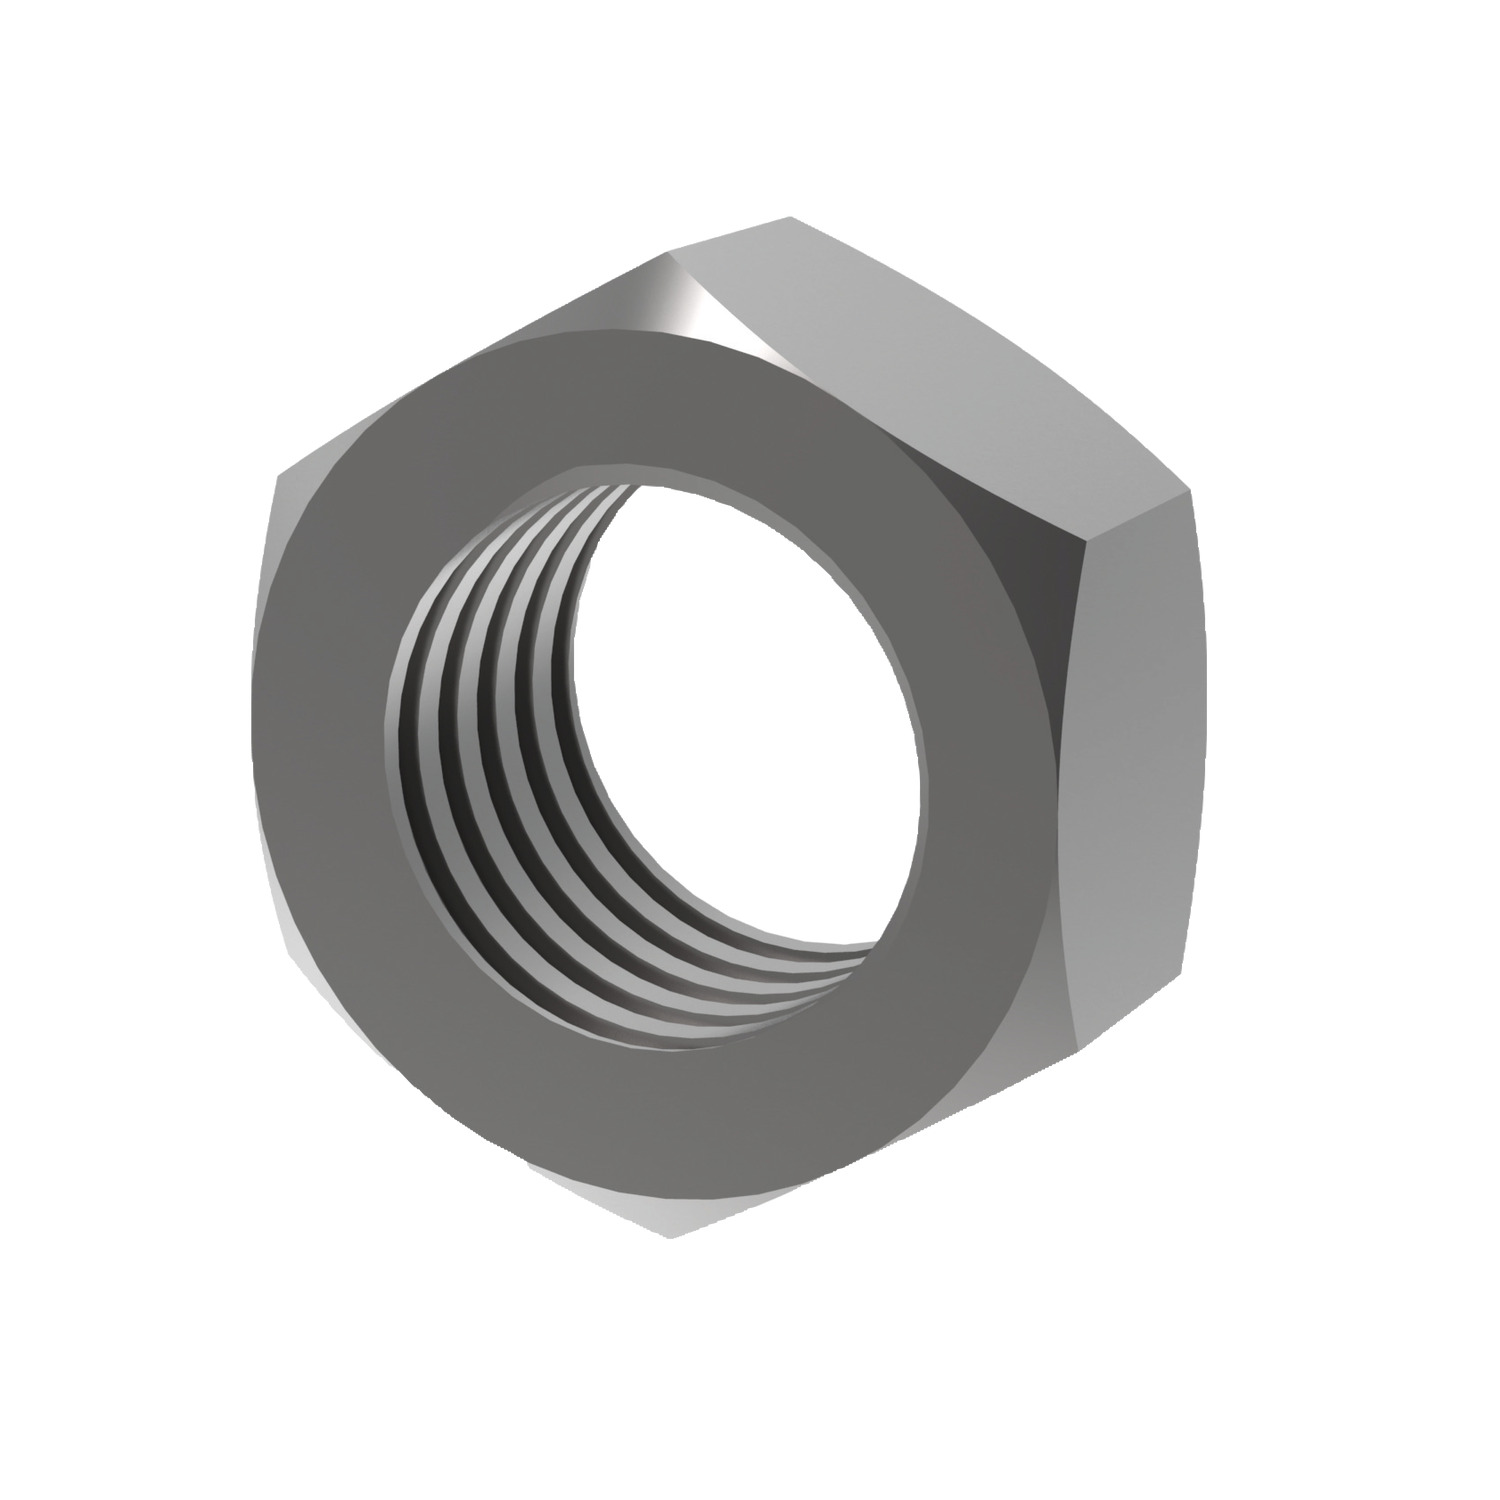 Lock Nuts Coarse Thread Coarse thread lock nuts. Manufactured to DIN 439. Made from steel, self-coloured. Sizes range from M2 to M60.